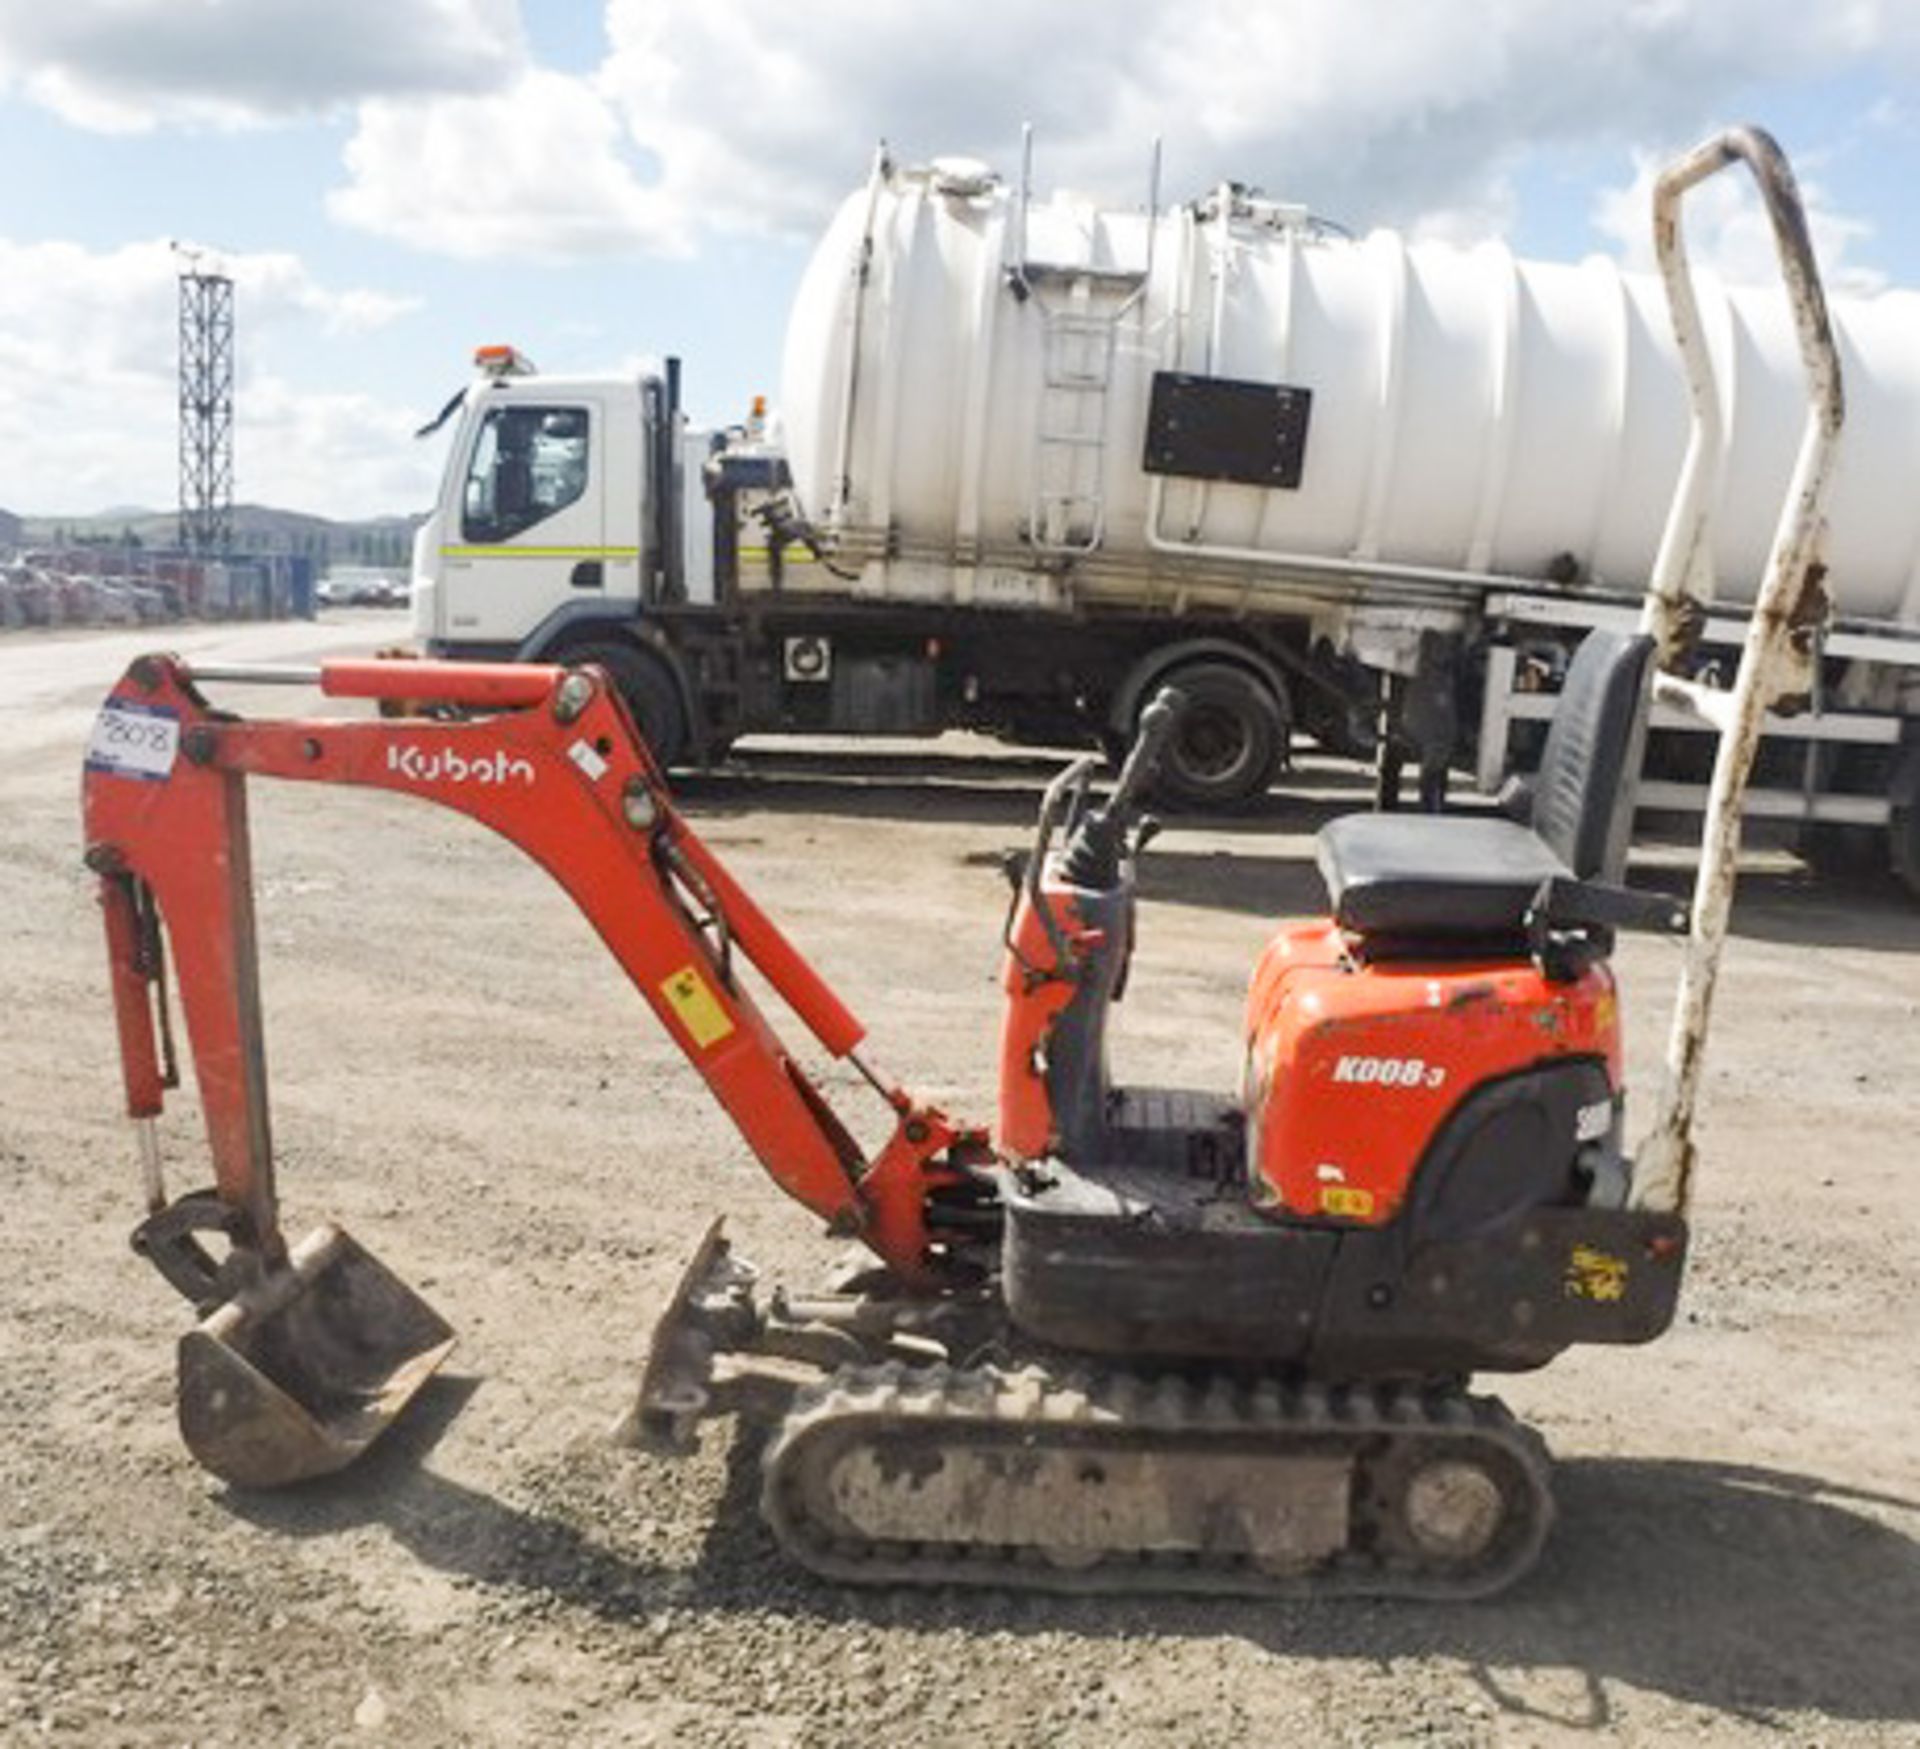 KUBOTA K008-3 ULTRA COMPACT EXCAVATOR C/W WITH BUCKET. SN12613. 3154 HRS. YEAR UNKNOWN - Image 9 of 18